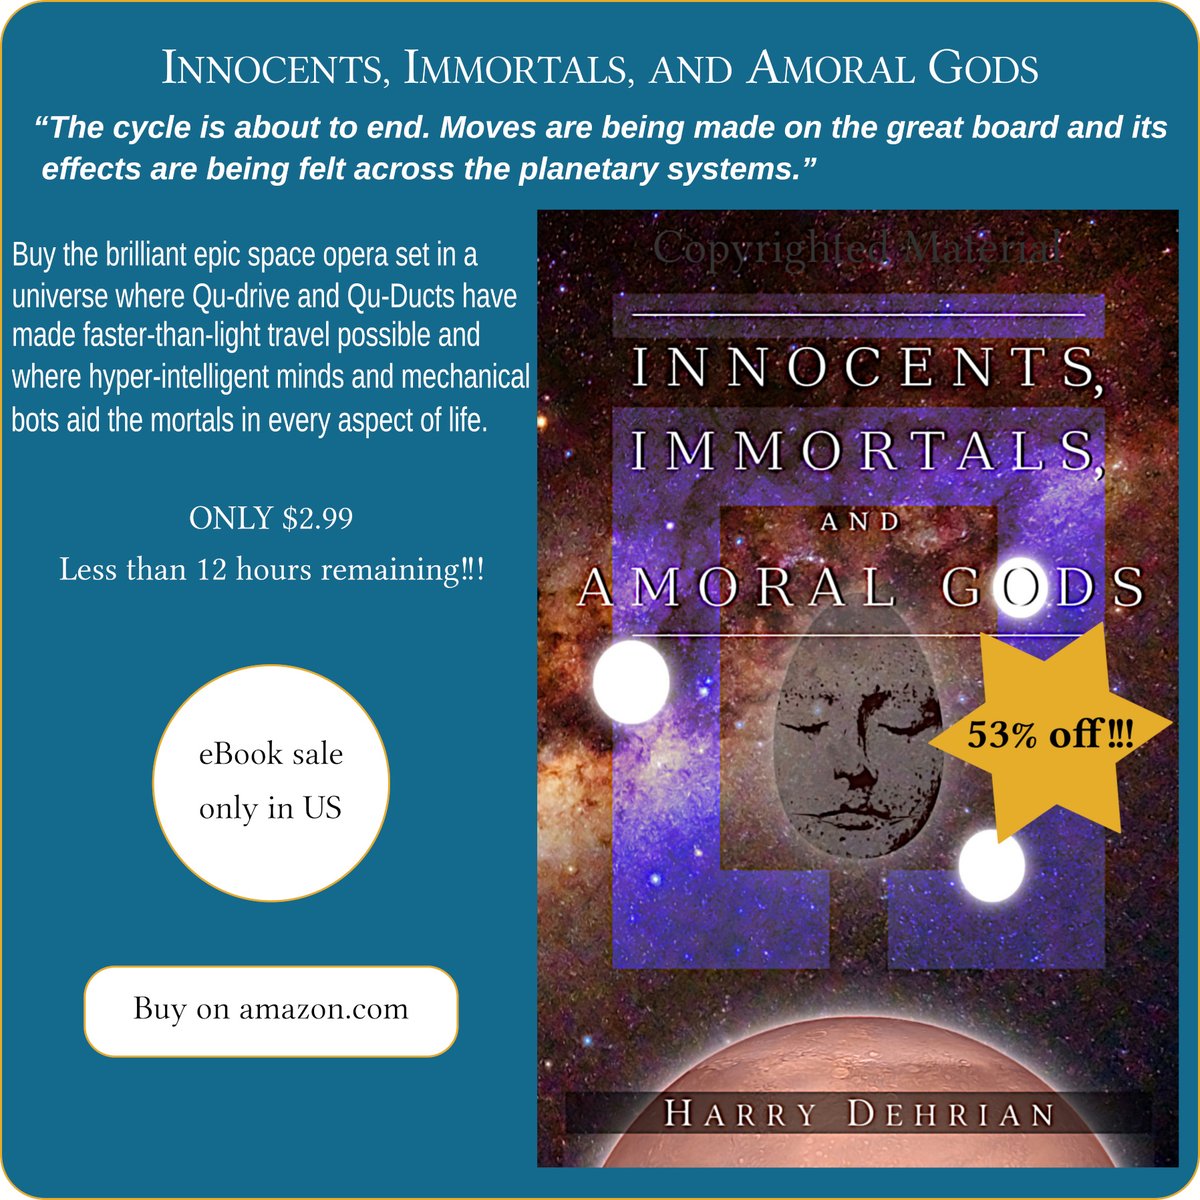 All #writers or members of #writingcommunity #authorscommunity #readerscommunity #bookcommunity #bookclubs #readersoftwitter

Great offer. 53% off! 
#Ebookdeals! Limited time offer!!! 

amazon.com/Innocents-Immo…

#writerslift #KindleDeal #kindlesale #spaceopera #sciencefiction #ues